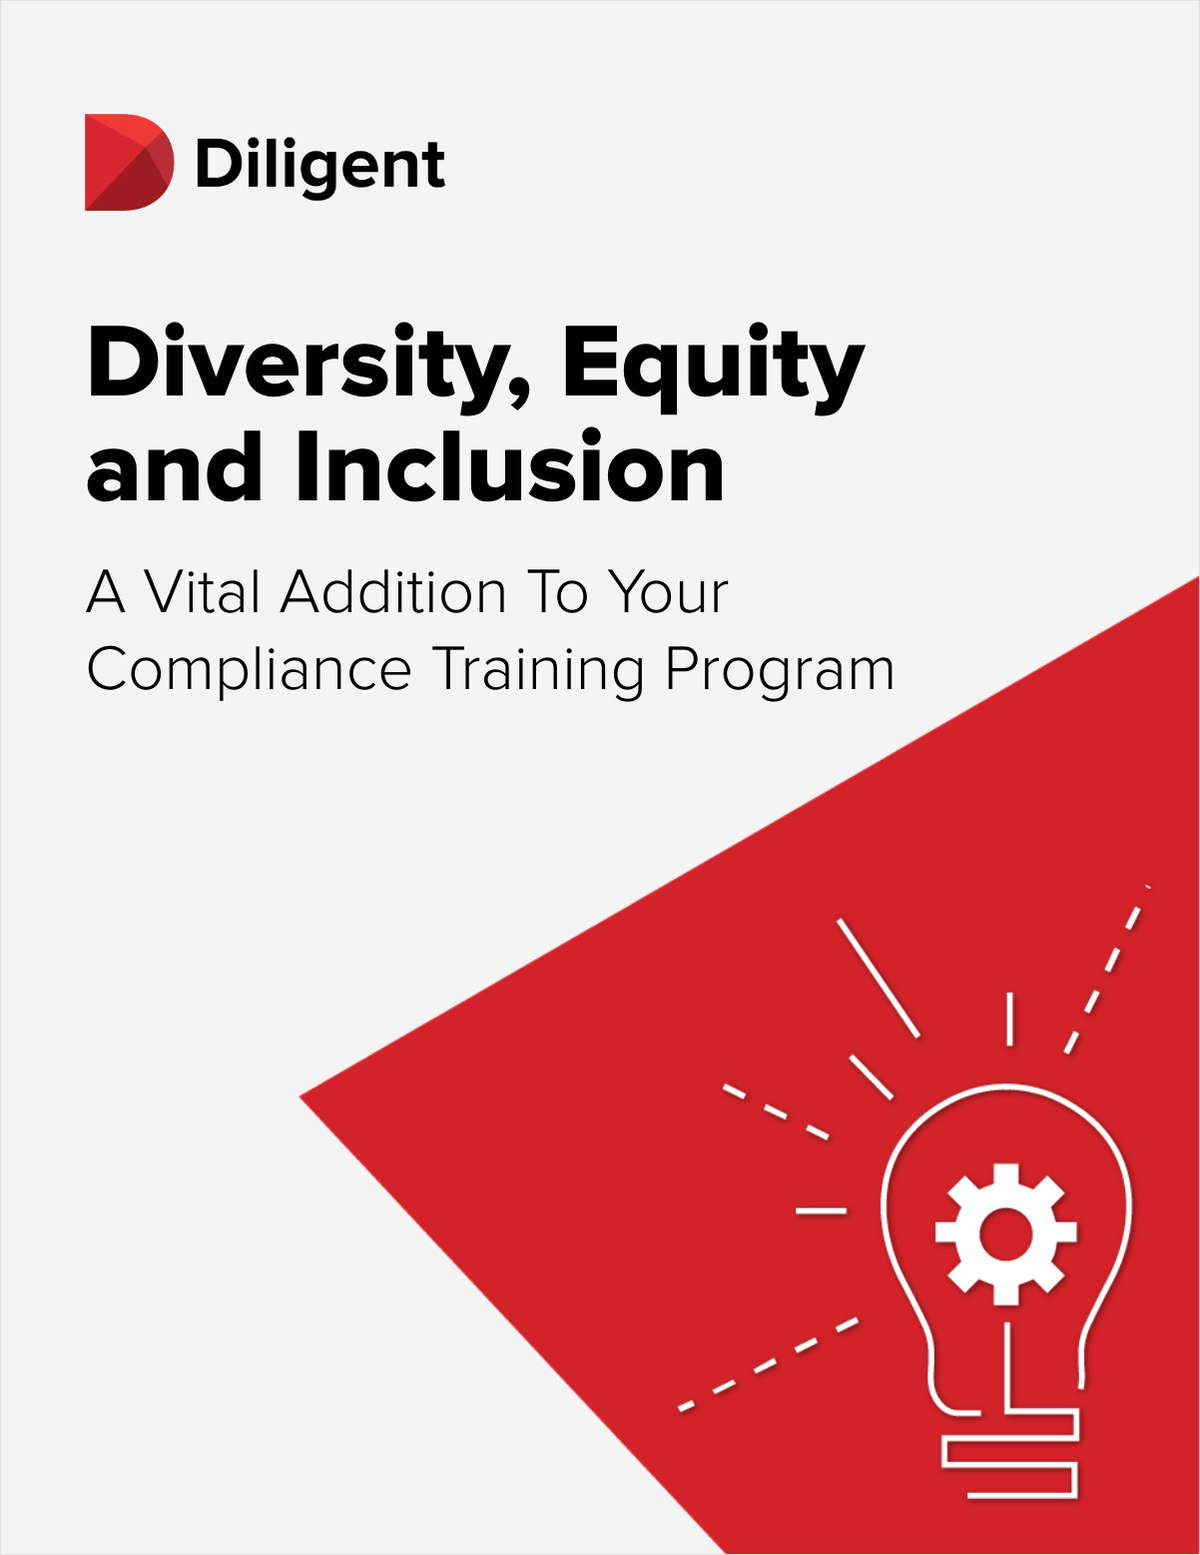 Diversity, Equity and Inclusion: A Vital Addition To Your Compliance Training Program